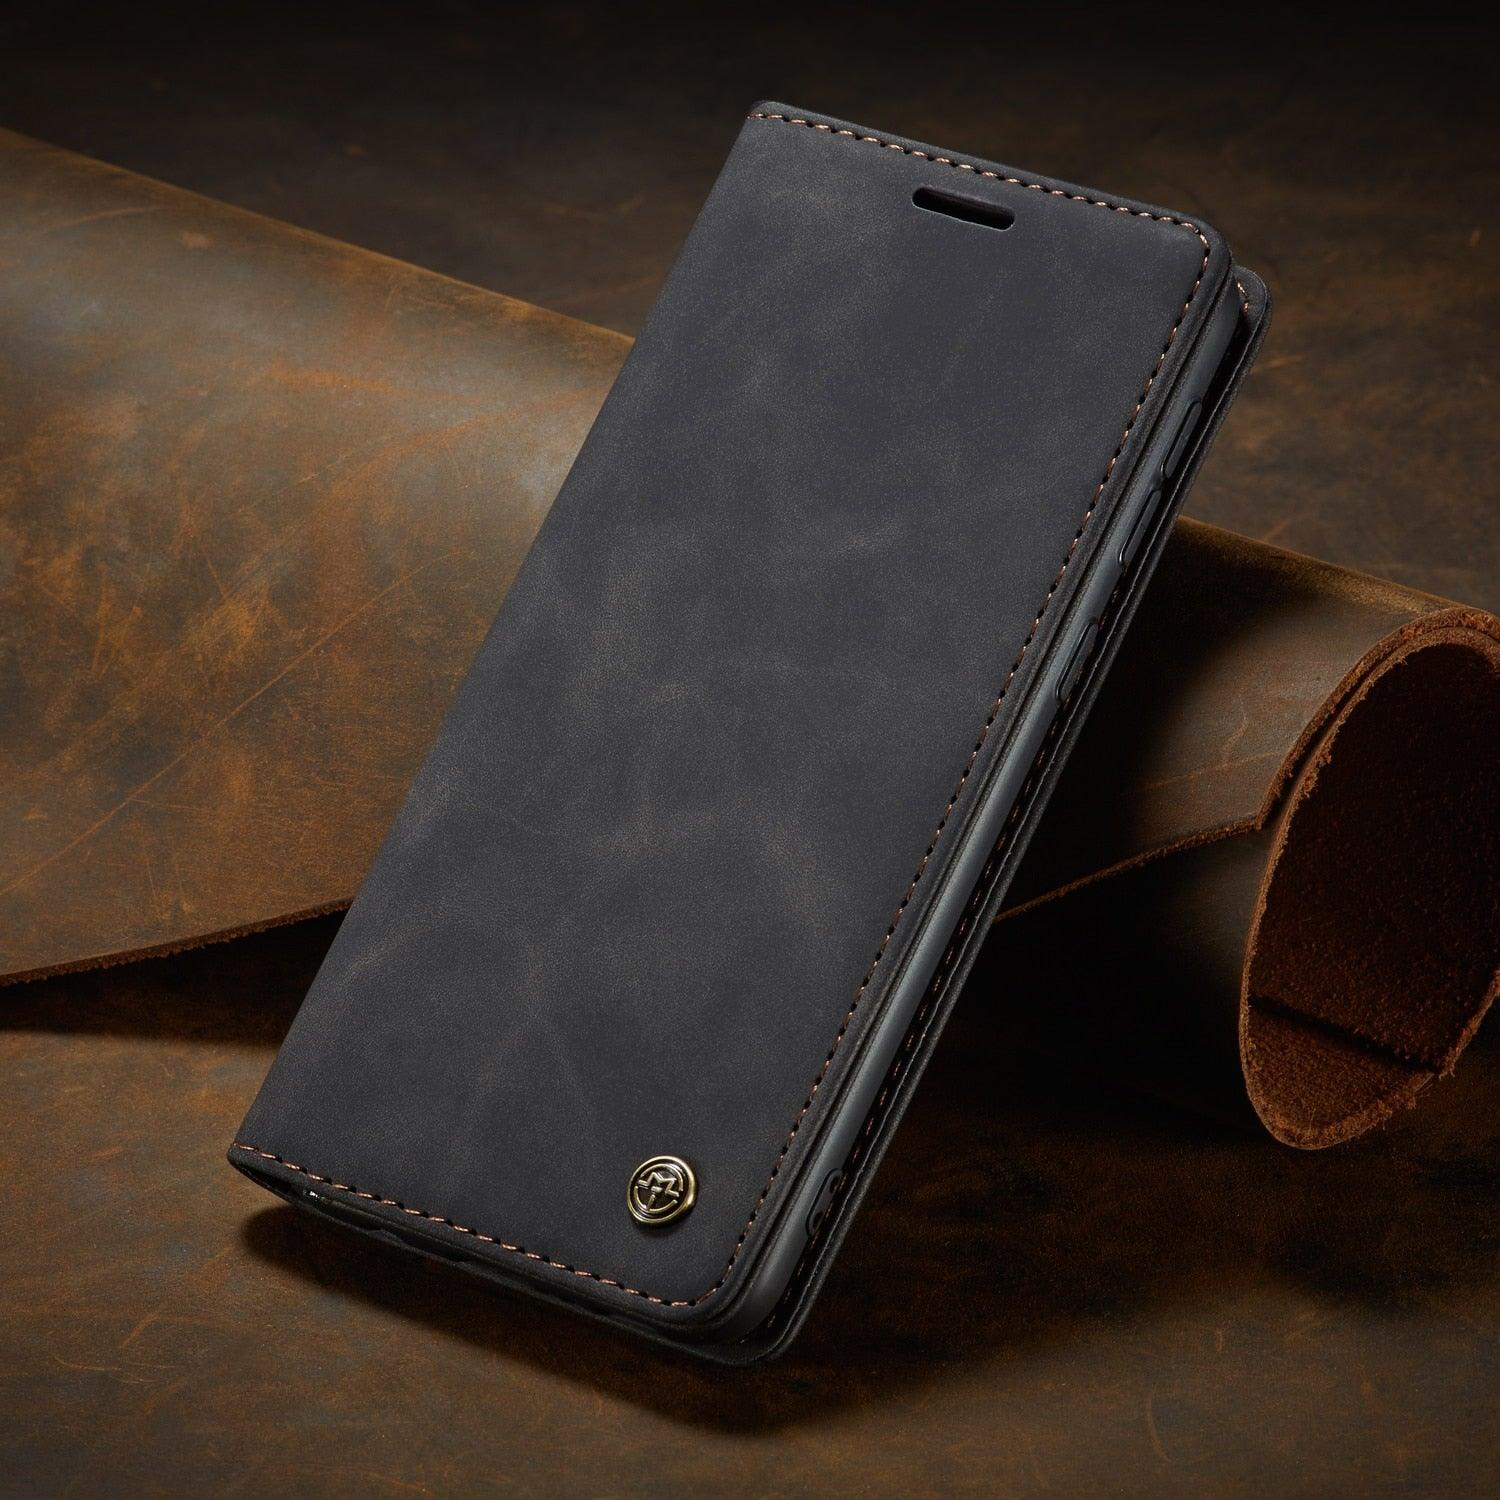 for Samsung Galaxy S21 Ultra S21 Plus 5G Leather Case,CaseMe Retro Purse Luxury Magneti Card Holder Wallet Cover For Galaxy S21